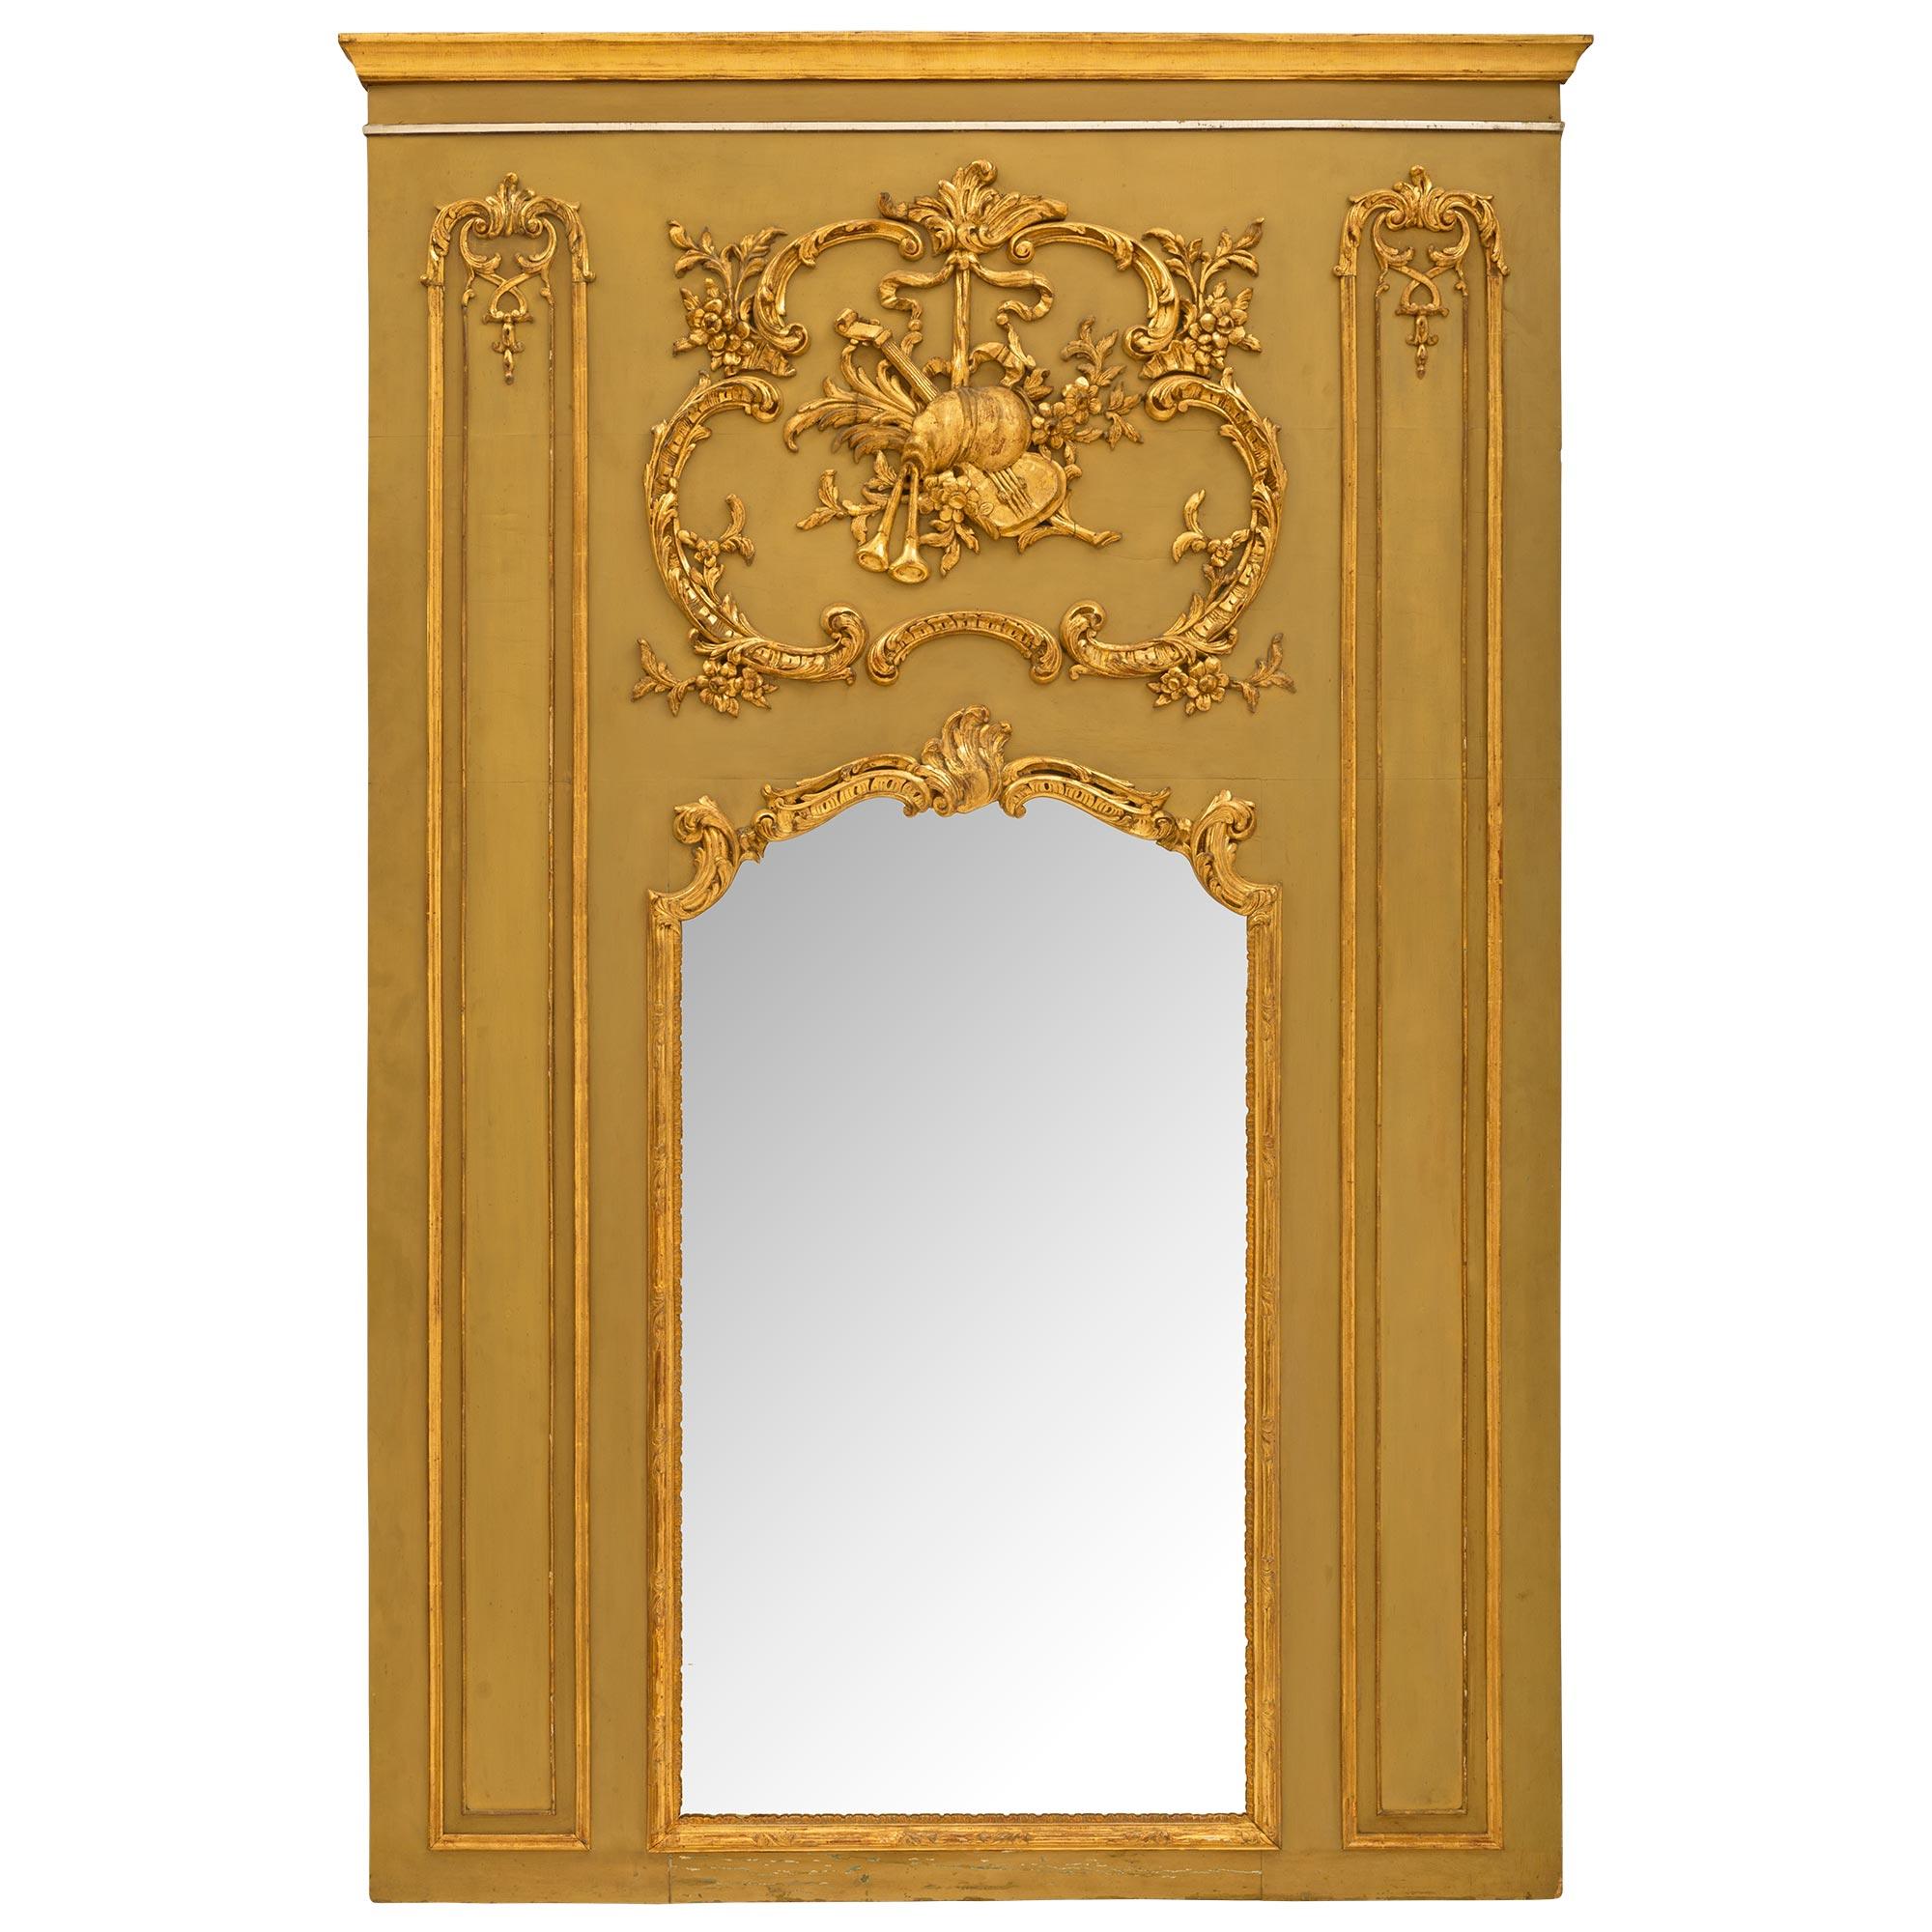 An exceptional French Louis XV or XVI st. patinated giltwood Trumeau. The background in patinated green is decorated by carved giltwood scrolls of acanthus leaves and flowers. The original mirror plate is framed in giltwood scrolls and reeded border